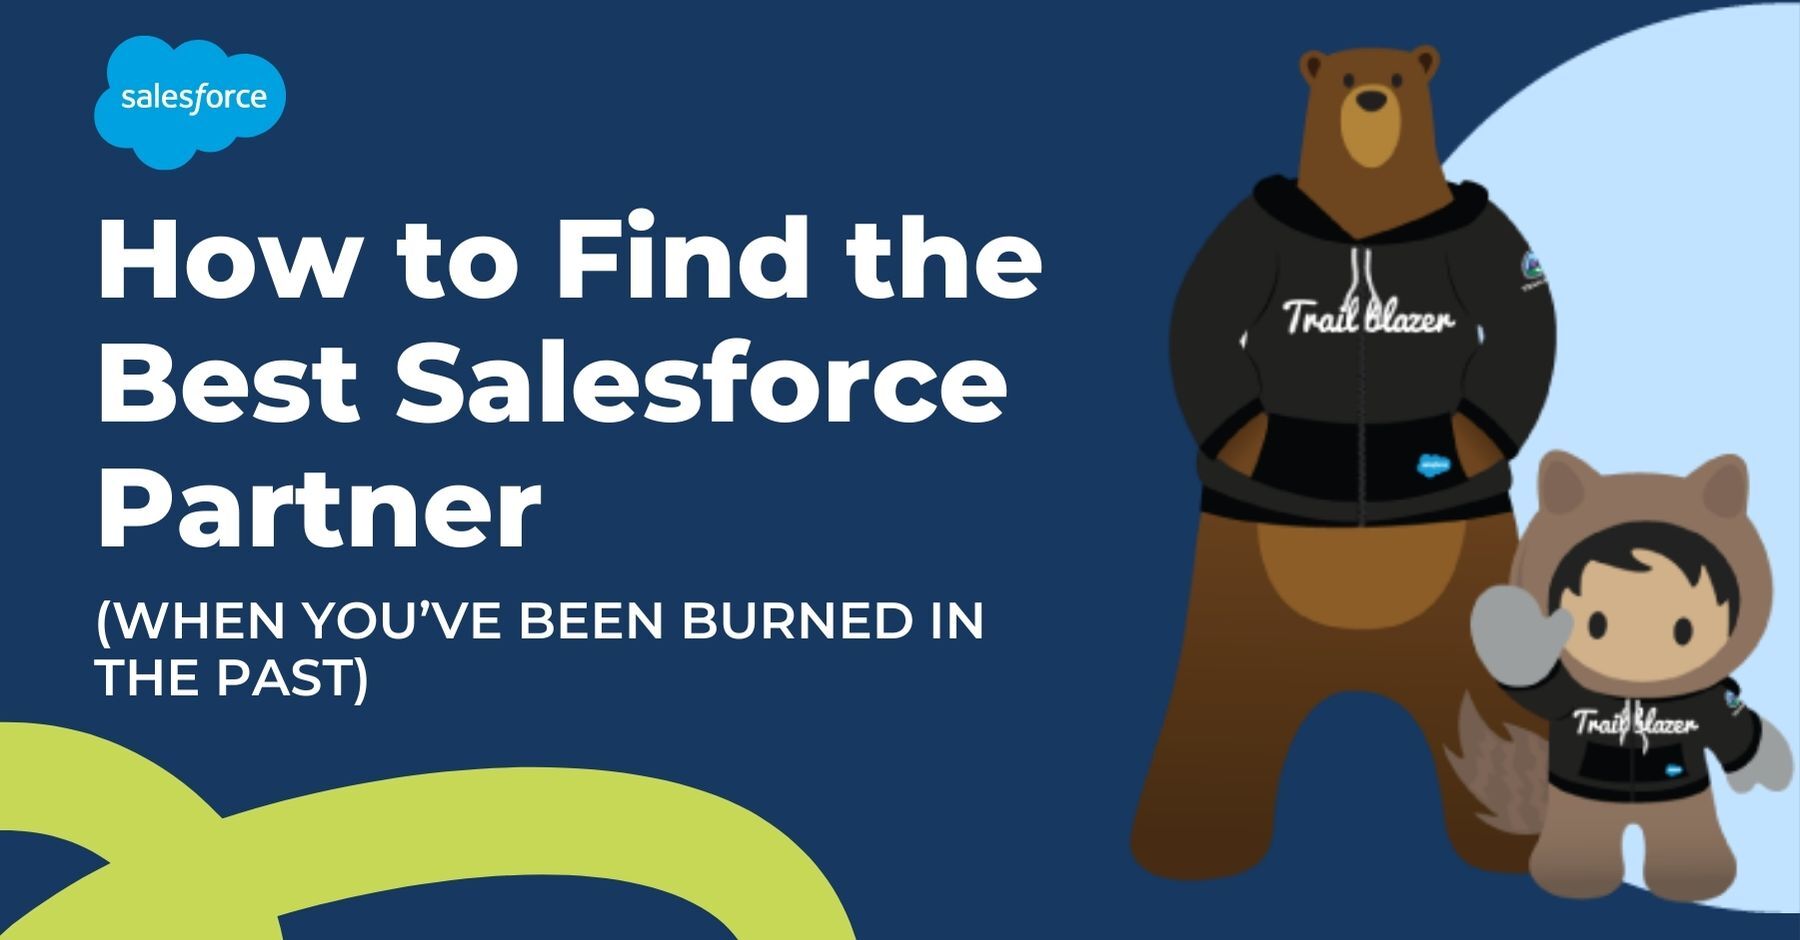 How to Find the Best Salesforce Partner